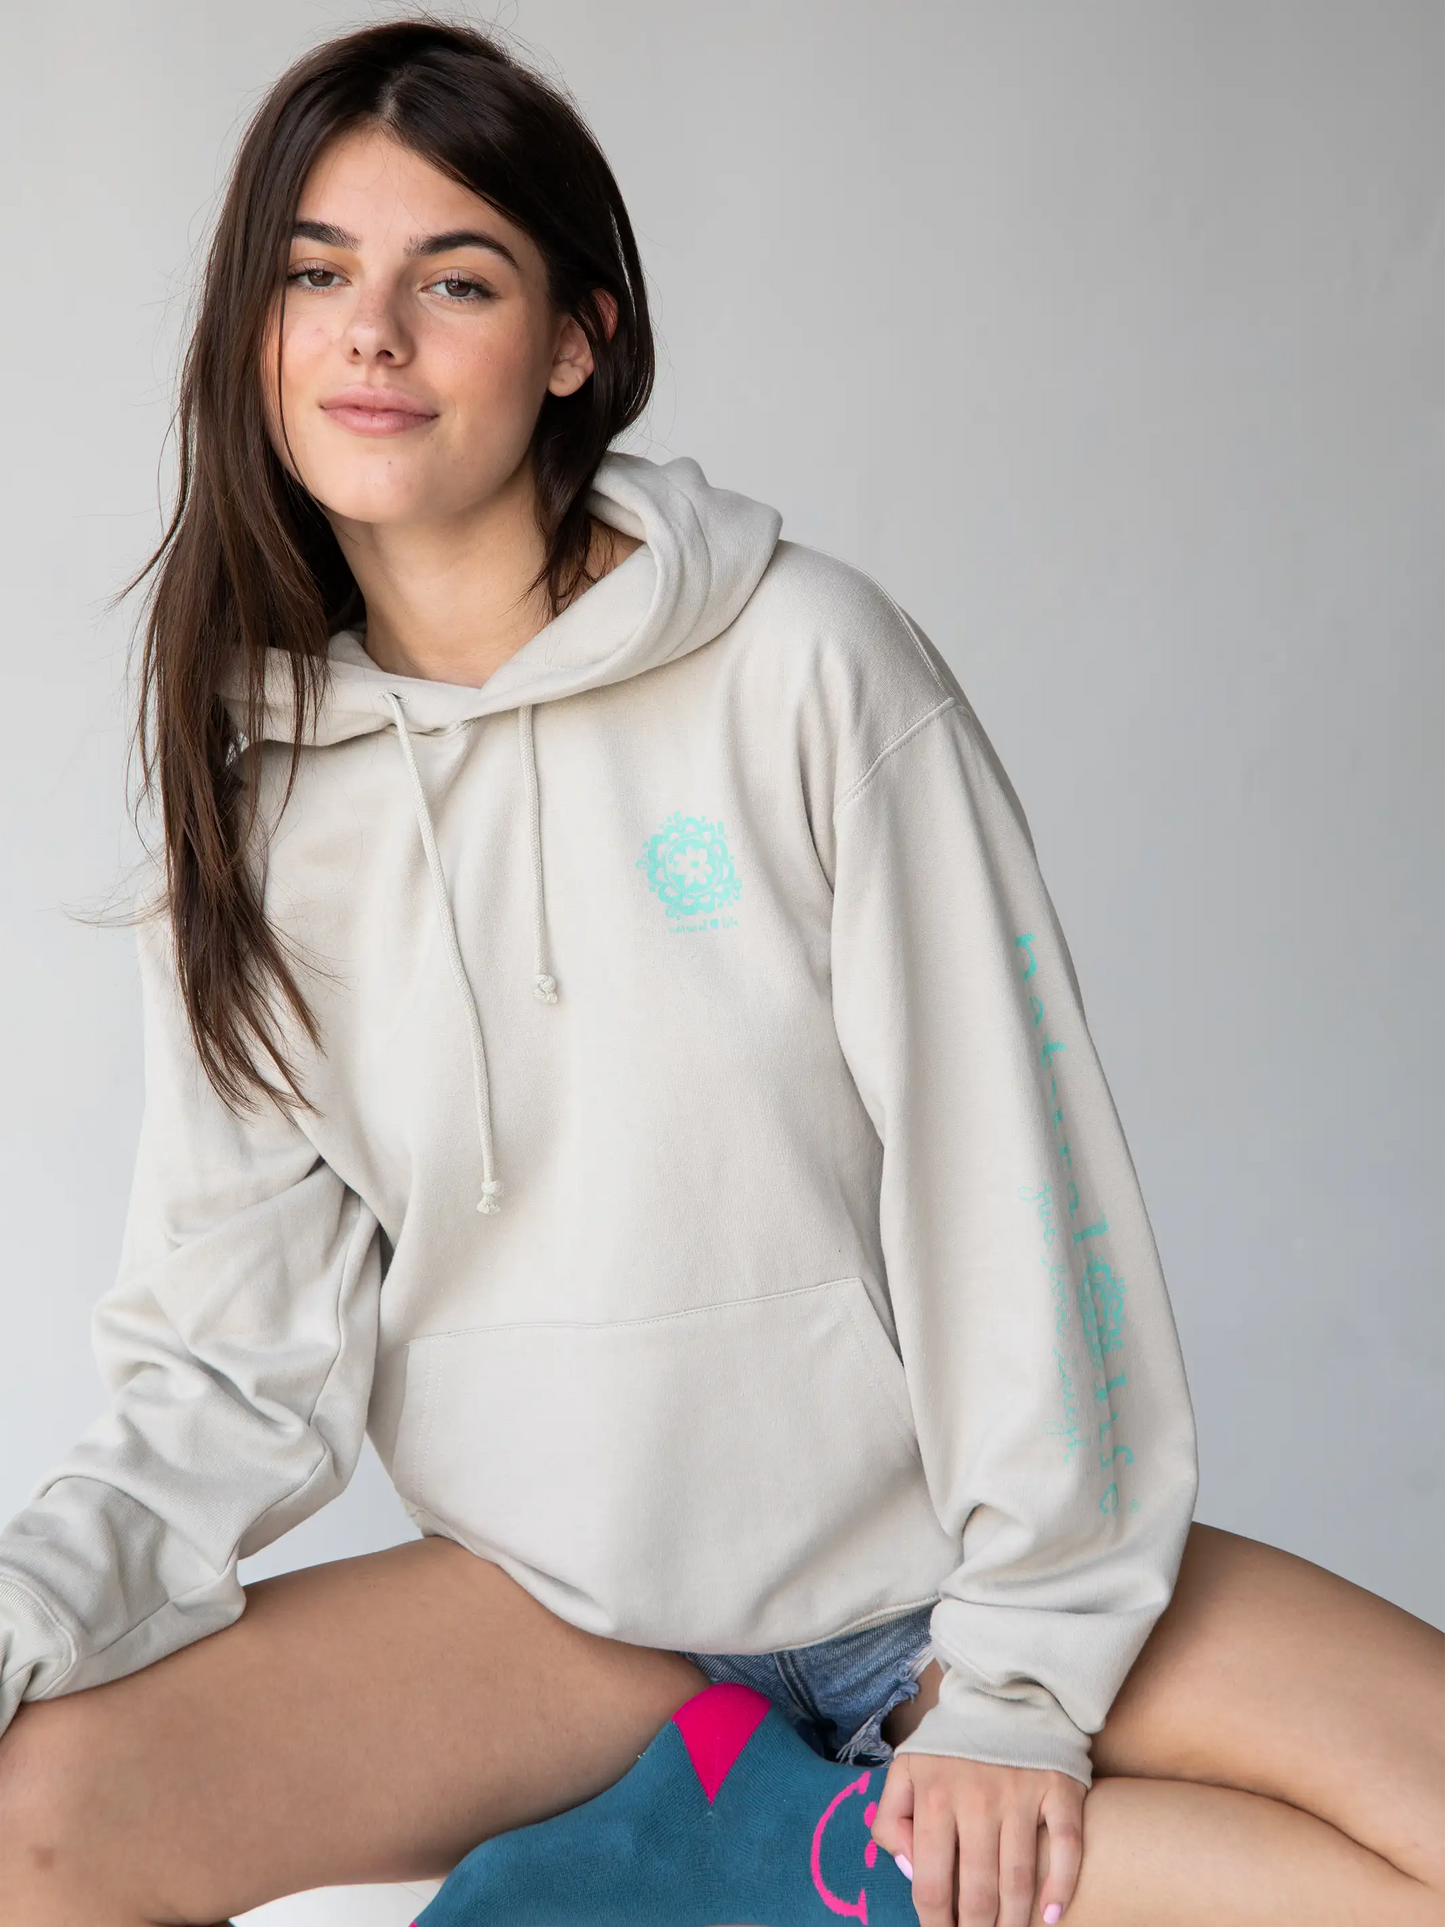 Good Vibes Only | Hoodie